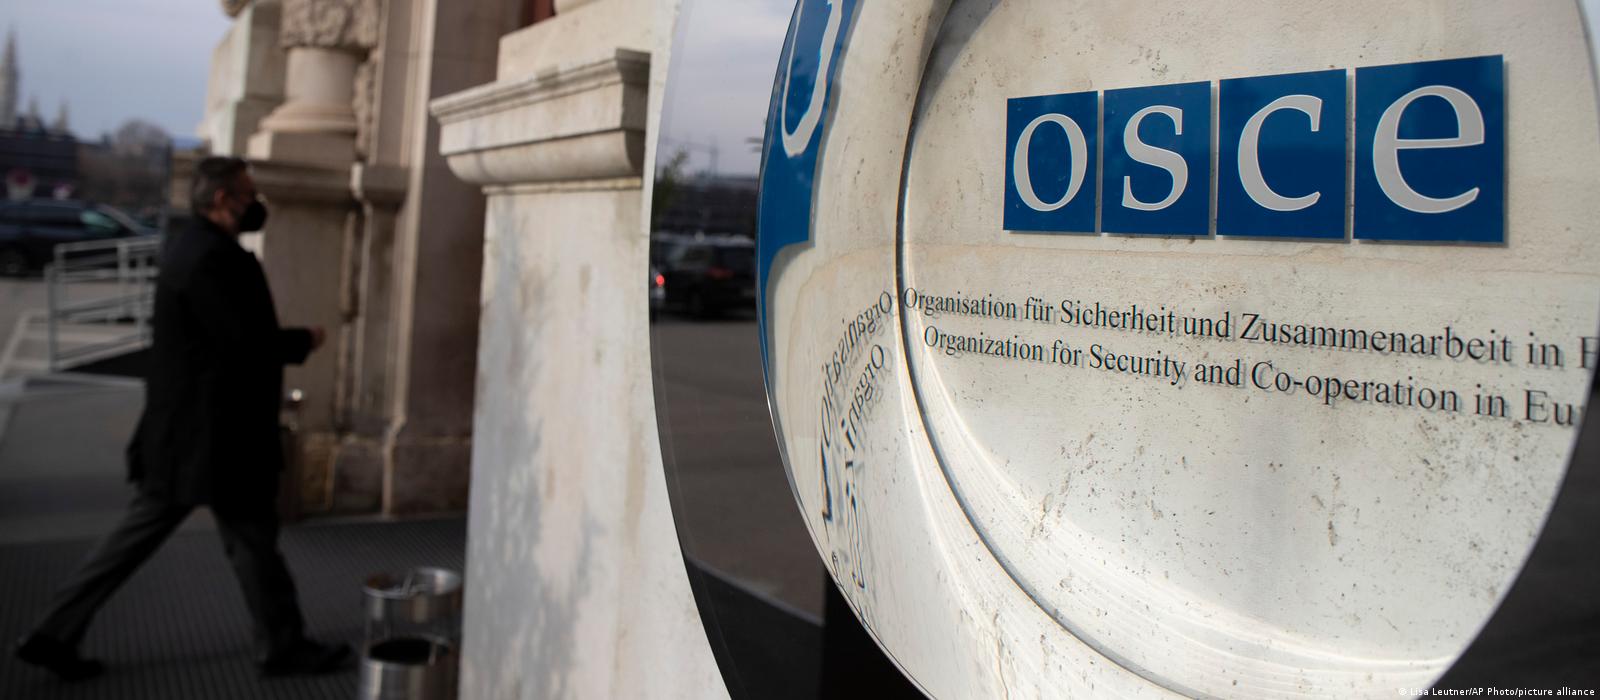 OSCE  Organization for Security and Co-operation in Europe